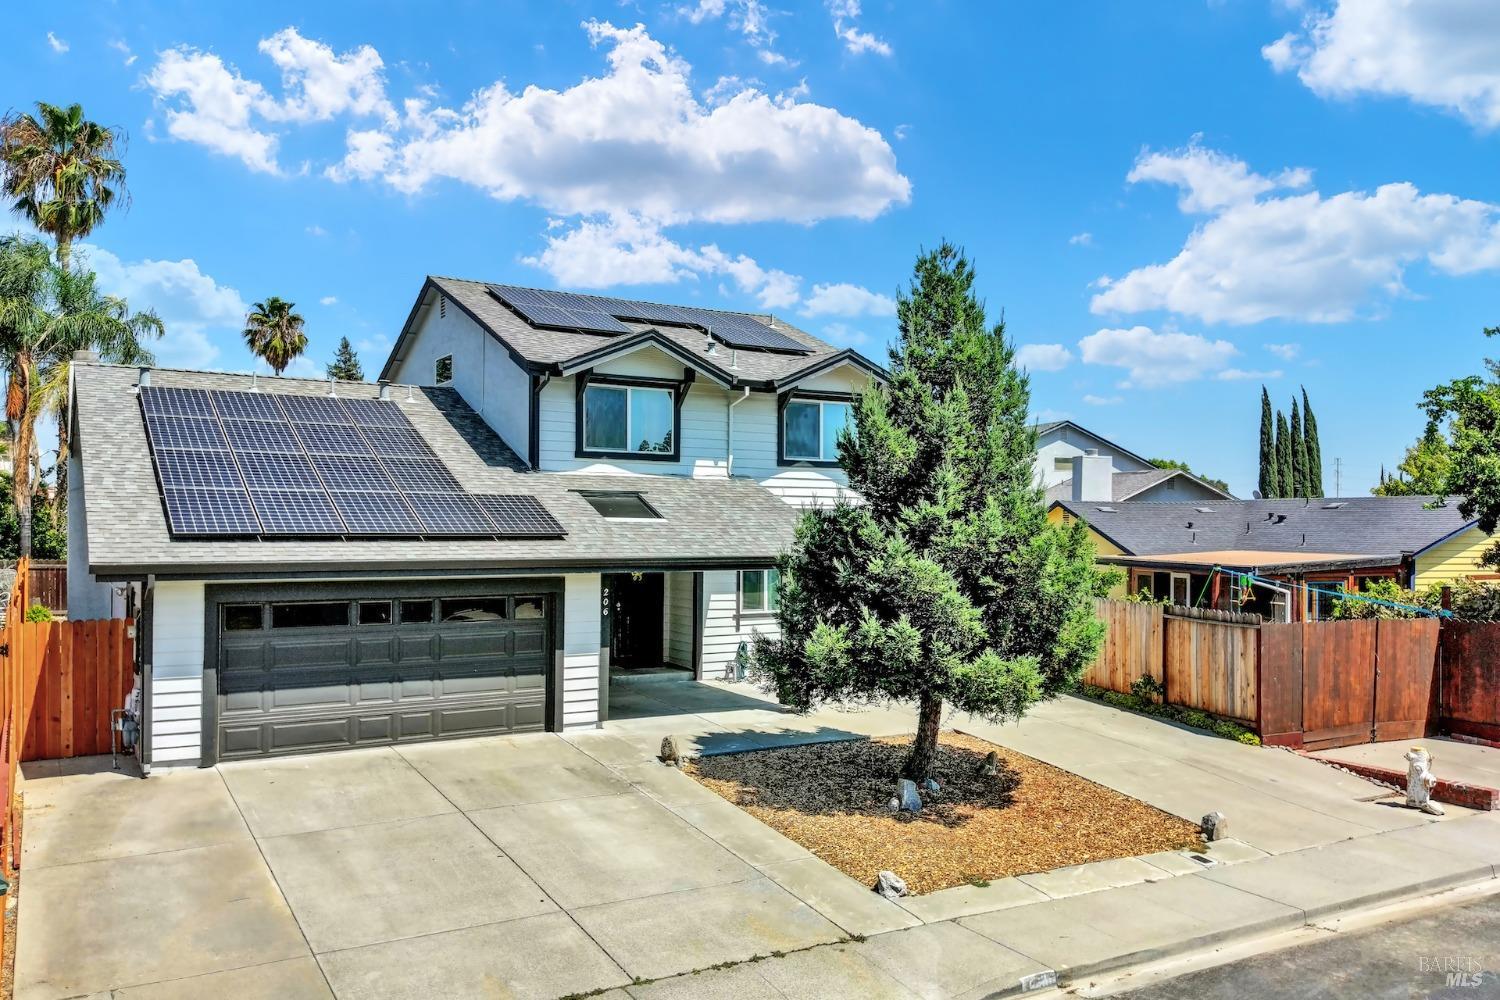 Photo of 206-206 Donegal Ct in Vacaville, CA